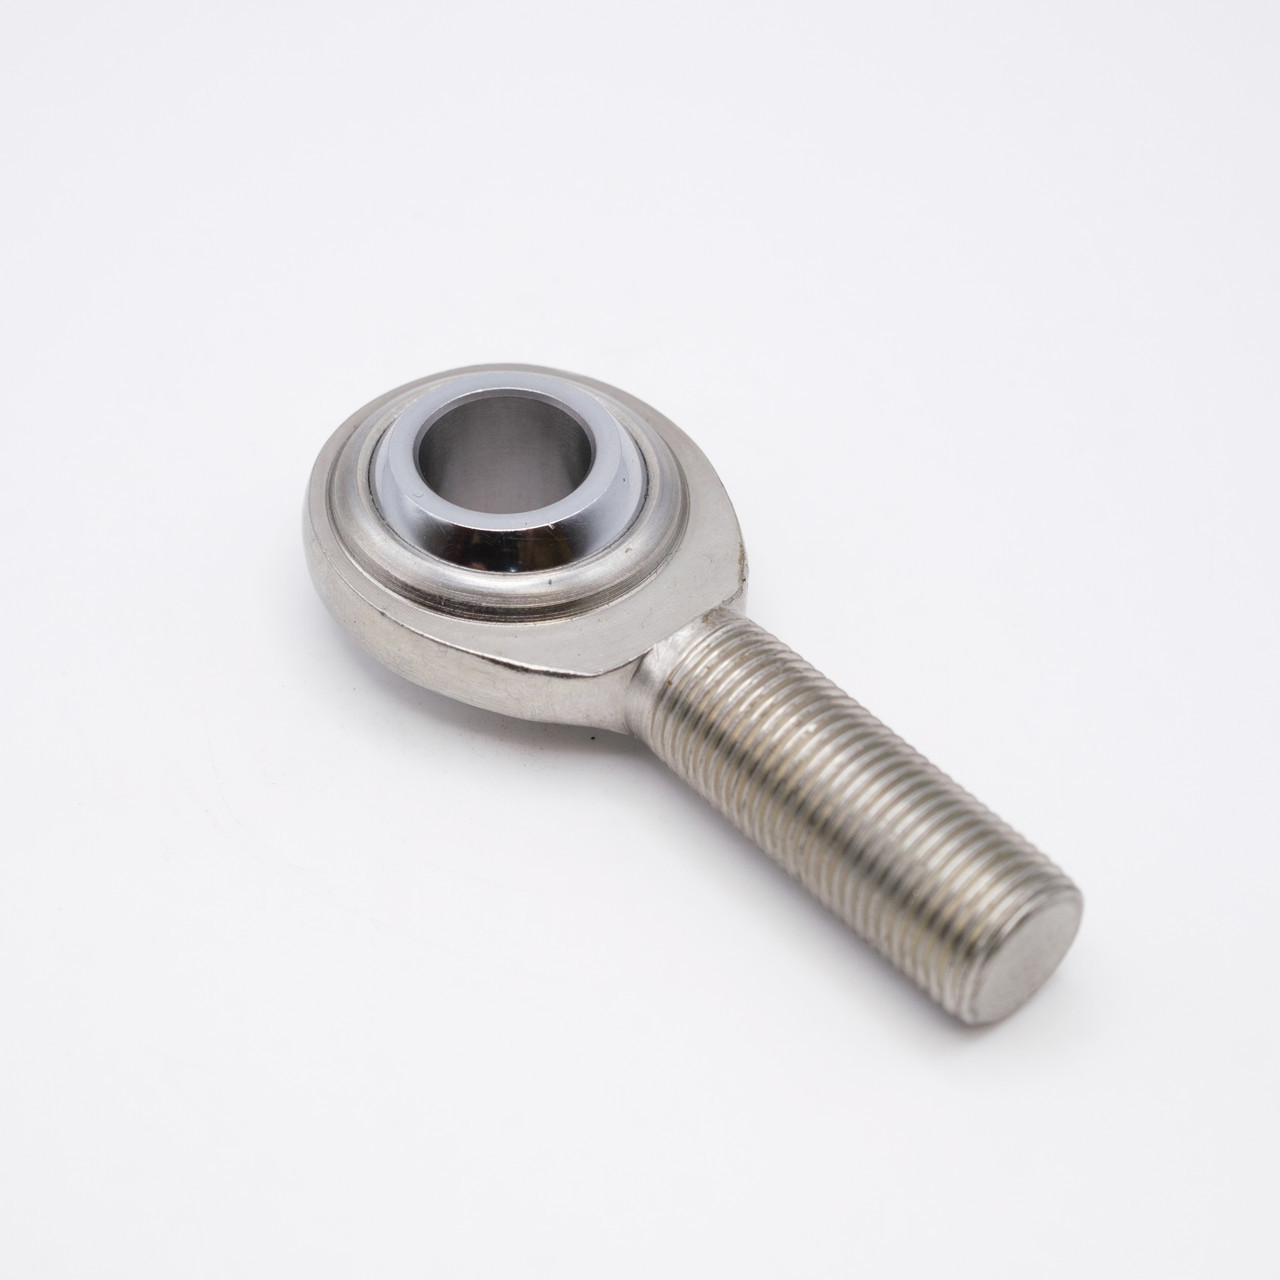 CM4T Inch Sized Rod End 1/4" Bore Left Angled View